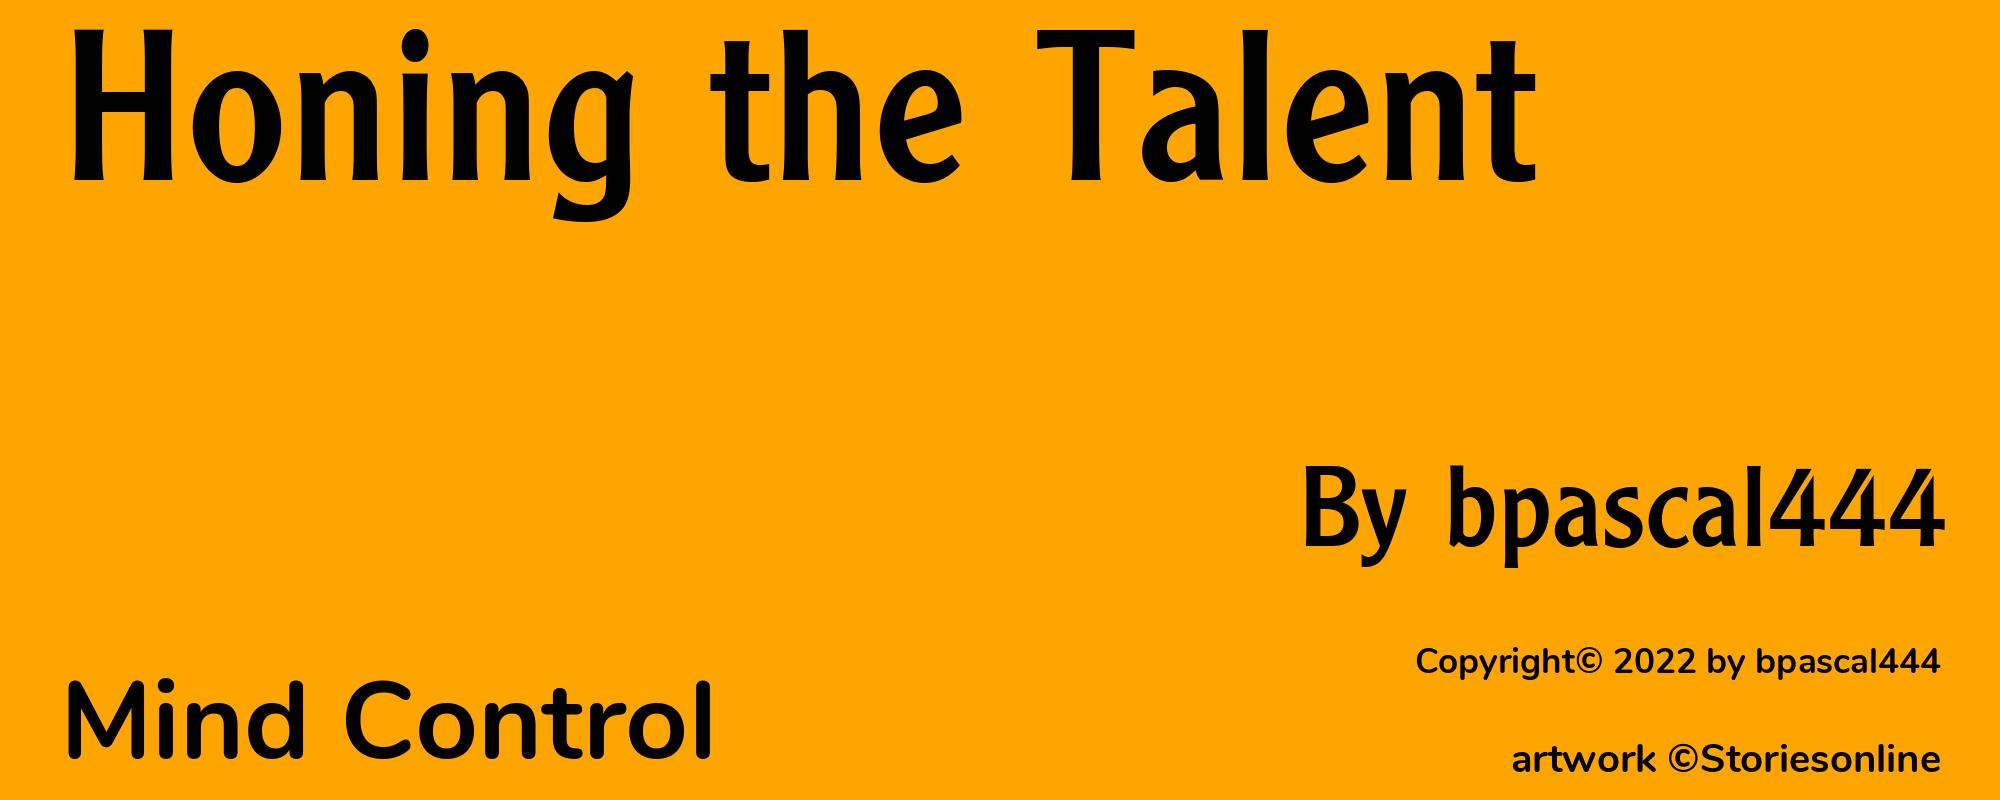 Honing the Talent - Cover